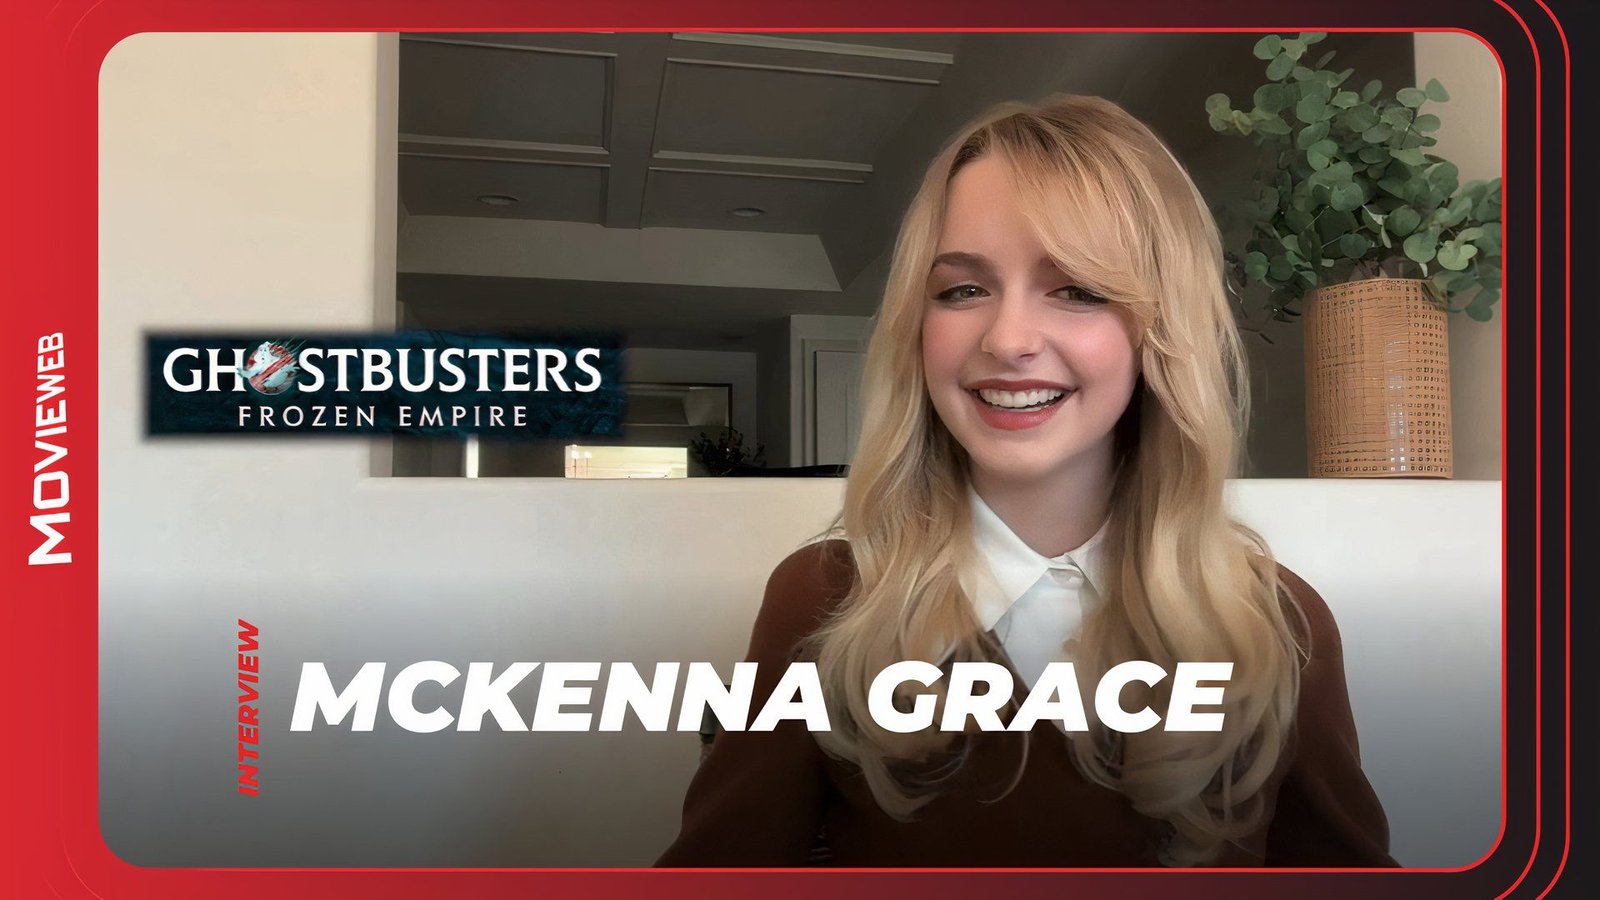 Mckenna Grace Reveals the Secret Love That Named Her Production Company